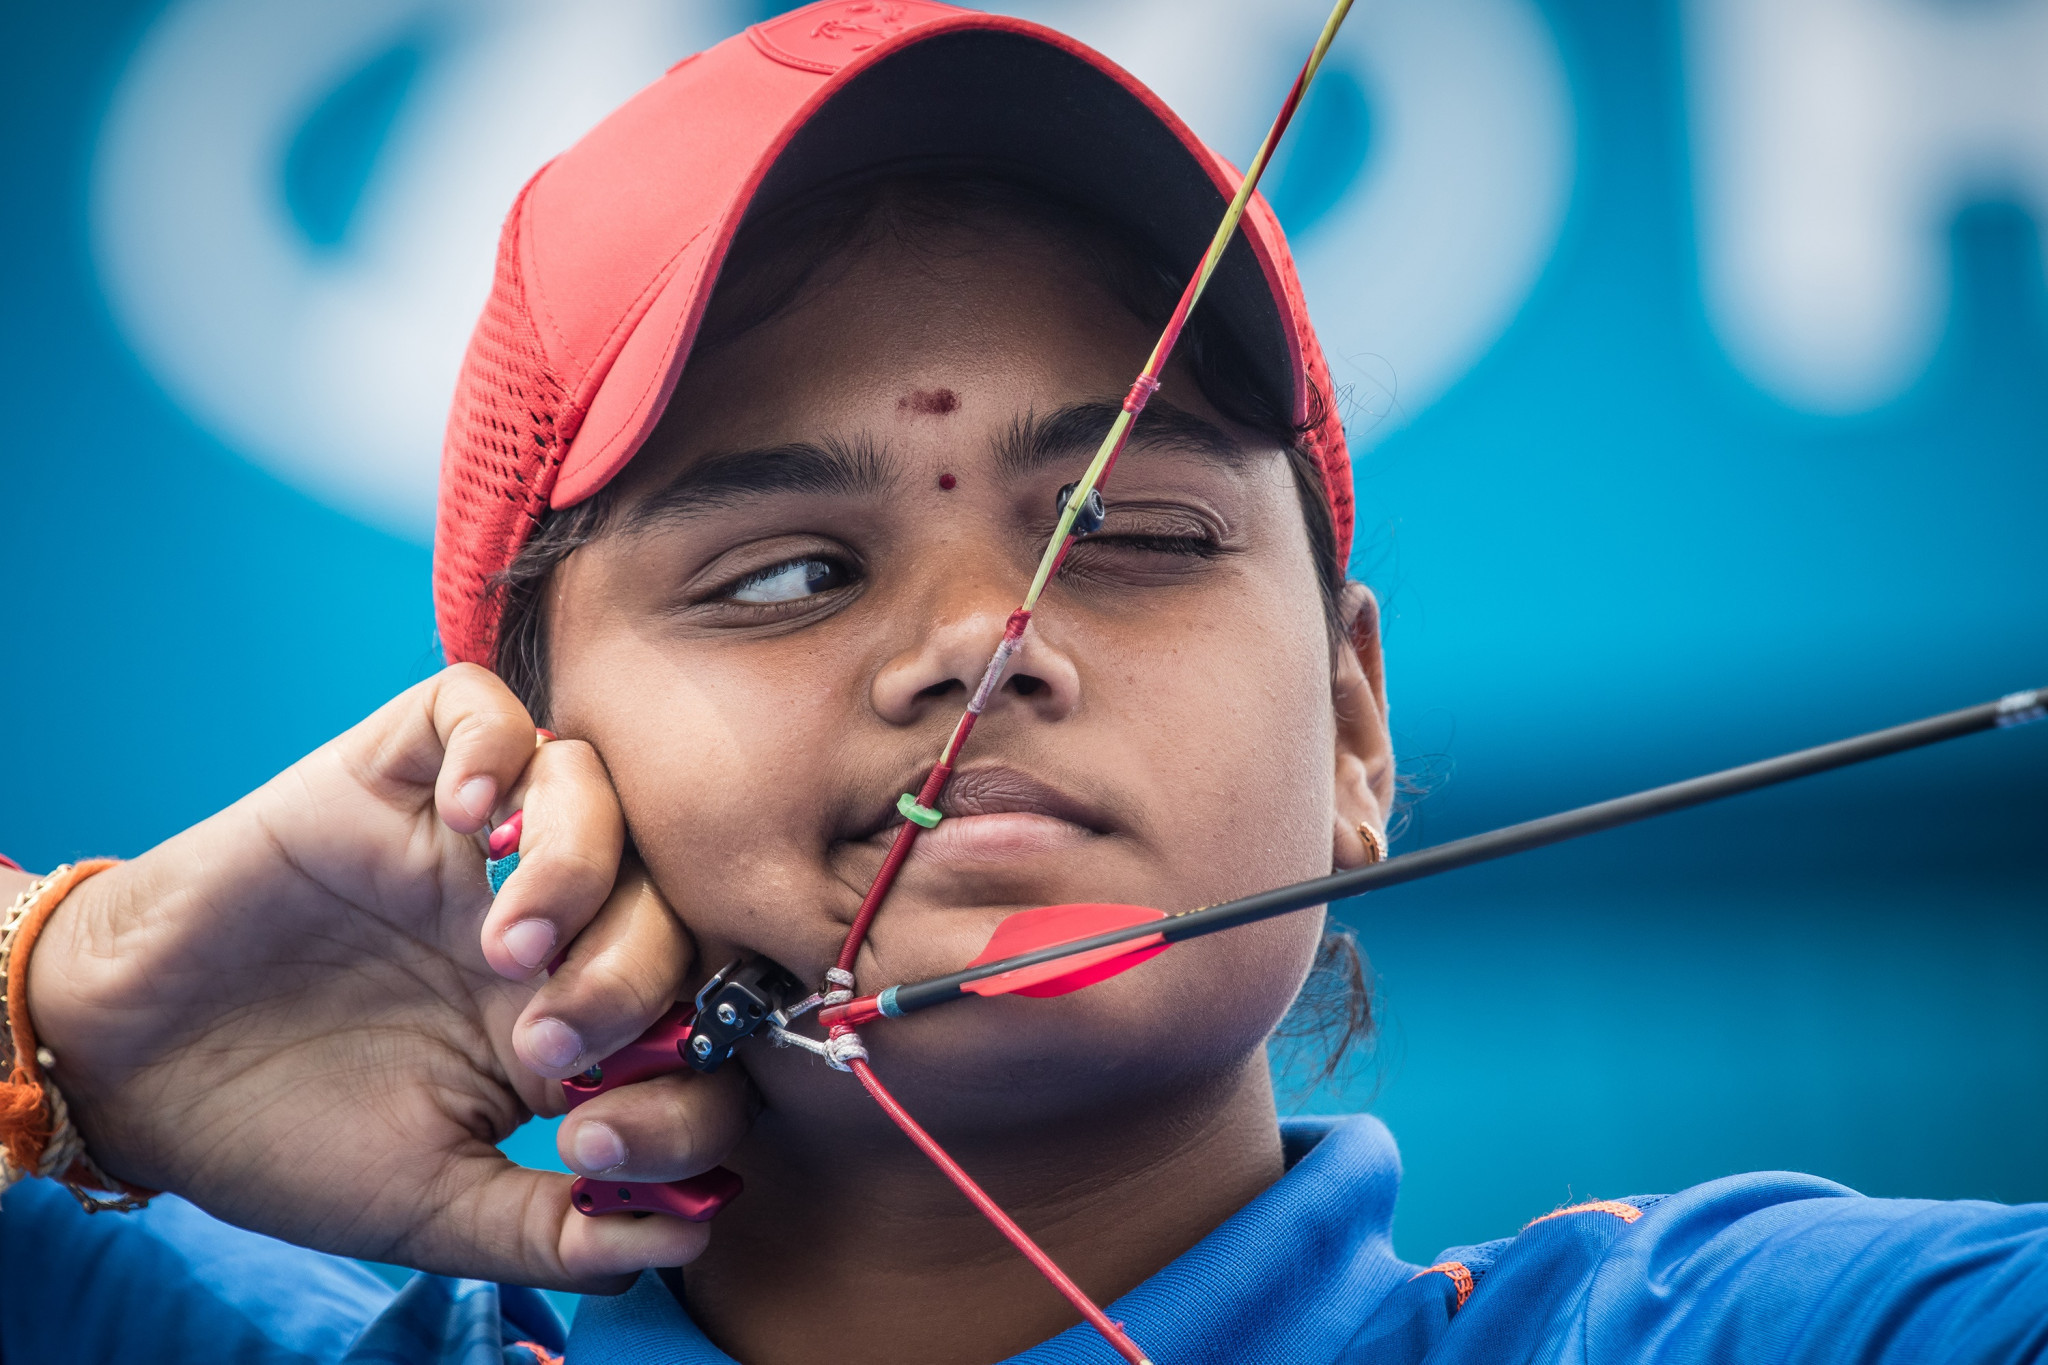 Jyothi Surekha Vennam won one of three Indian silver medals at the World Archery Championships last year ©Getty Images